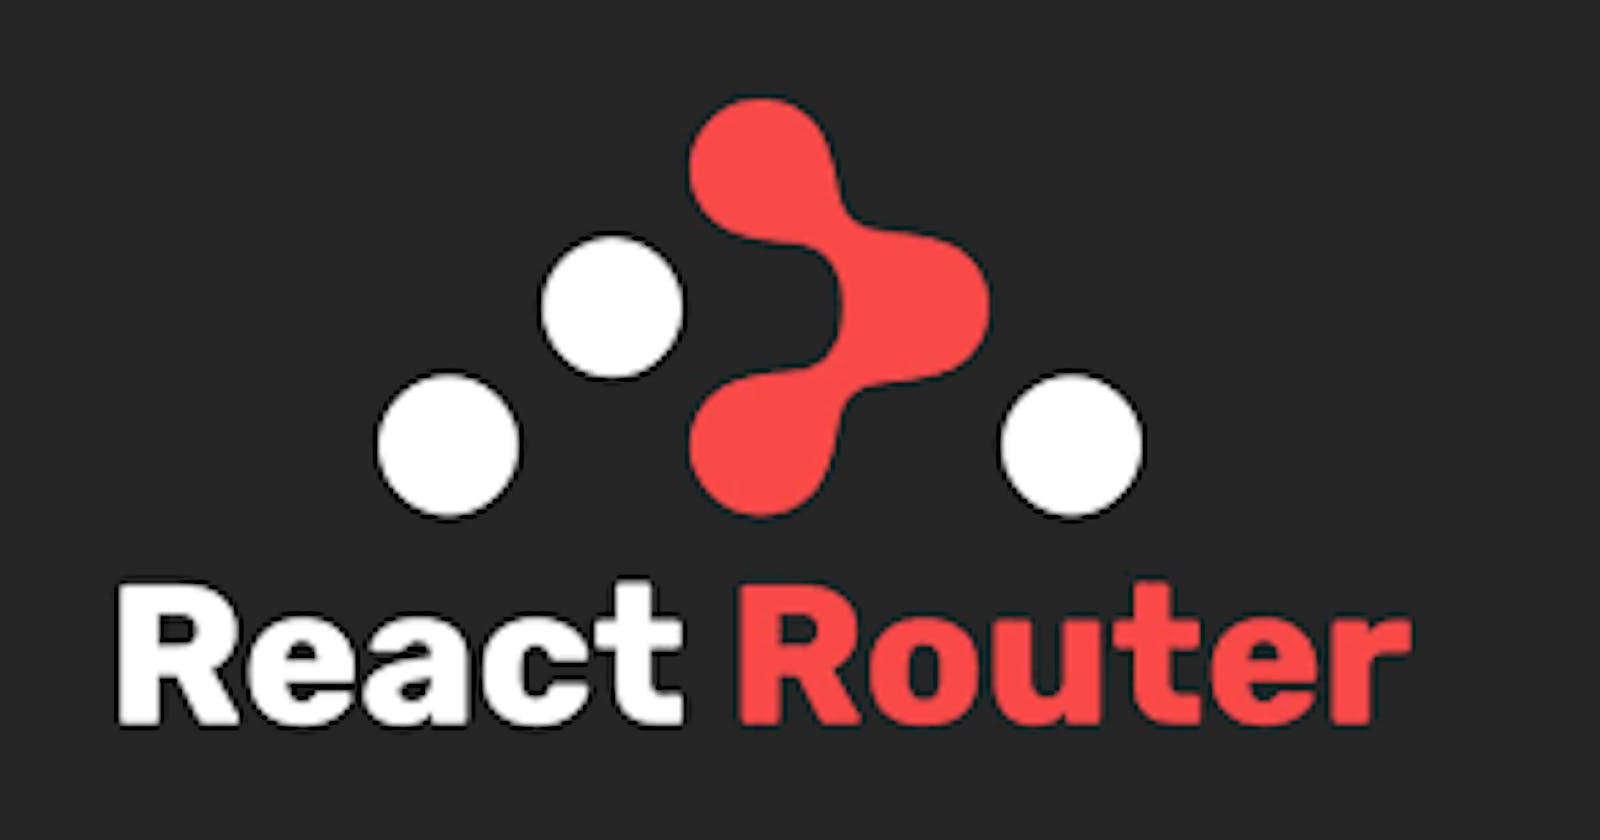 A guide to using React Router in React apps